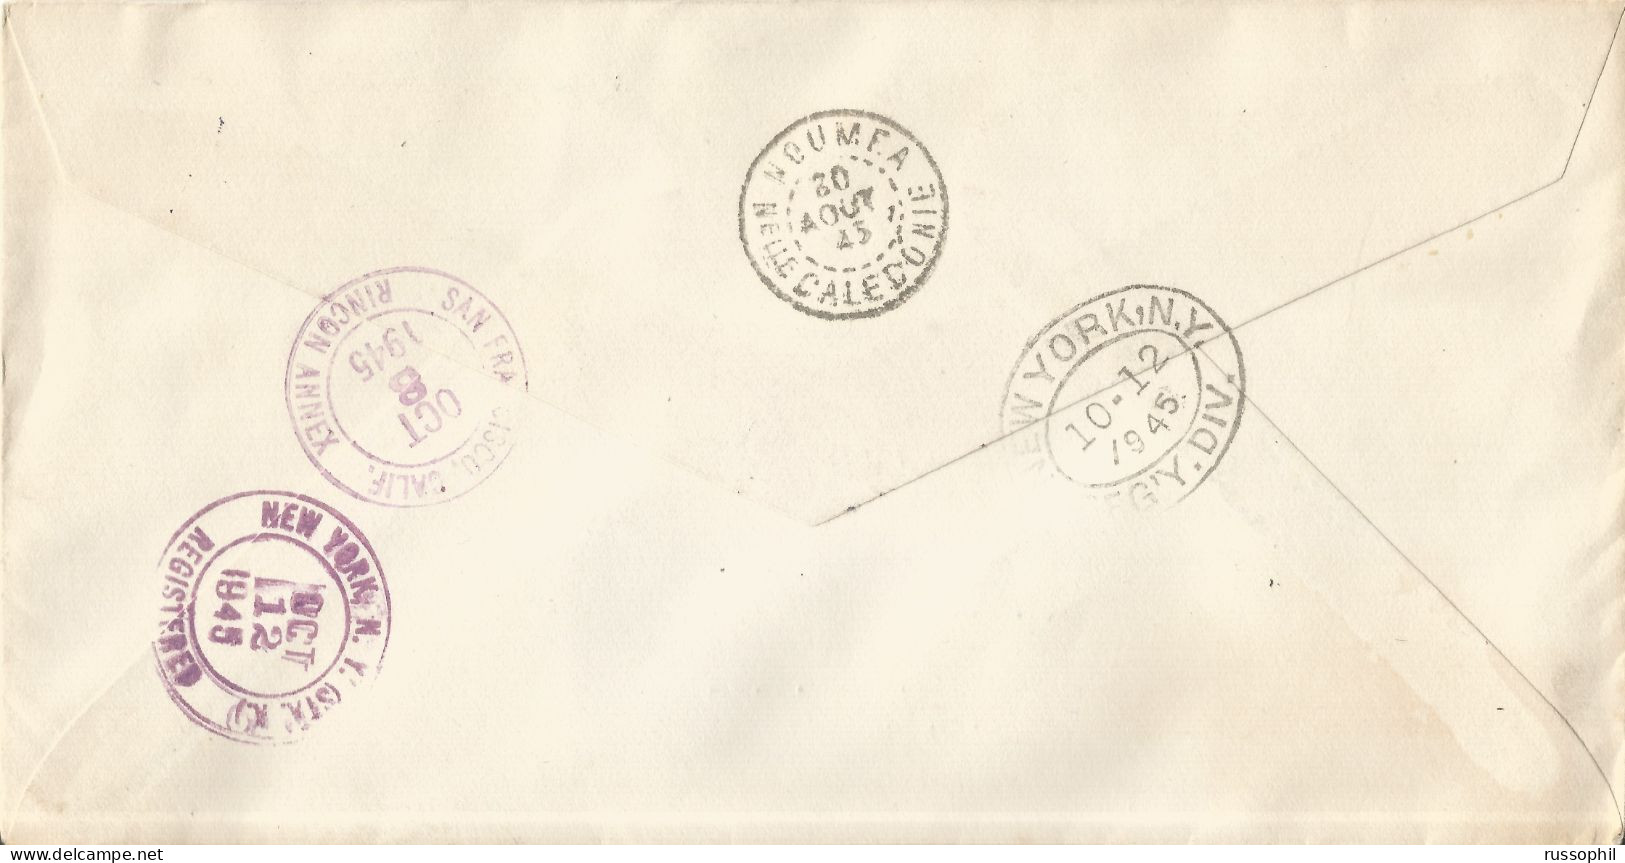 WALLIS AND FUTUNA - 7 STAMP 26 FR FRANKING "LONDON" ISSUE ON REGISTERED COVER TO THE USA - 1945 - Covers & Documents